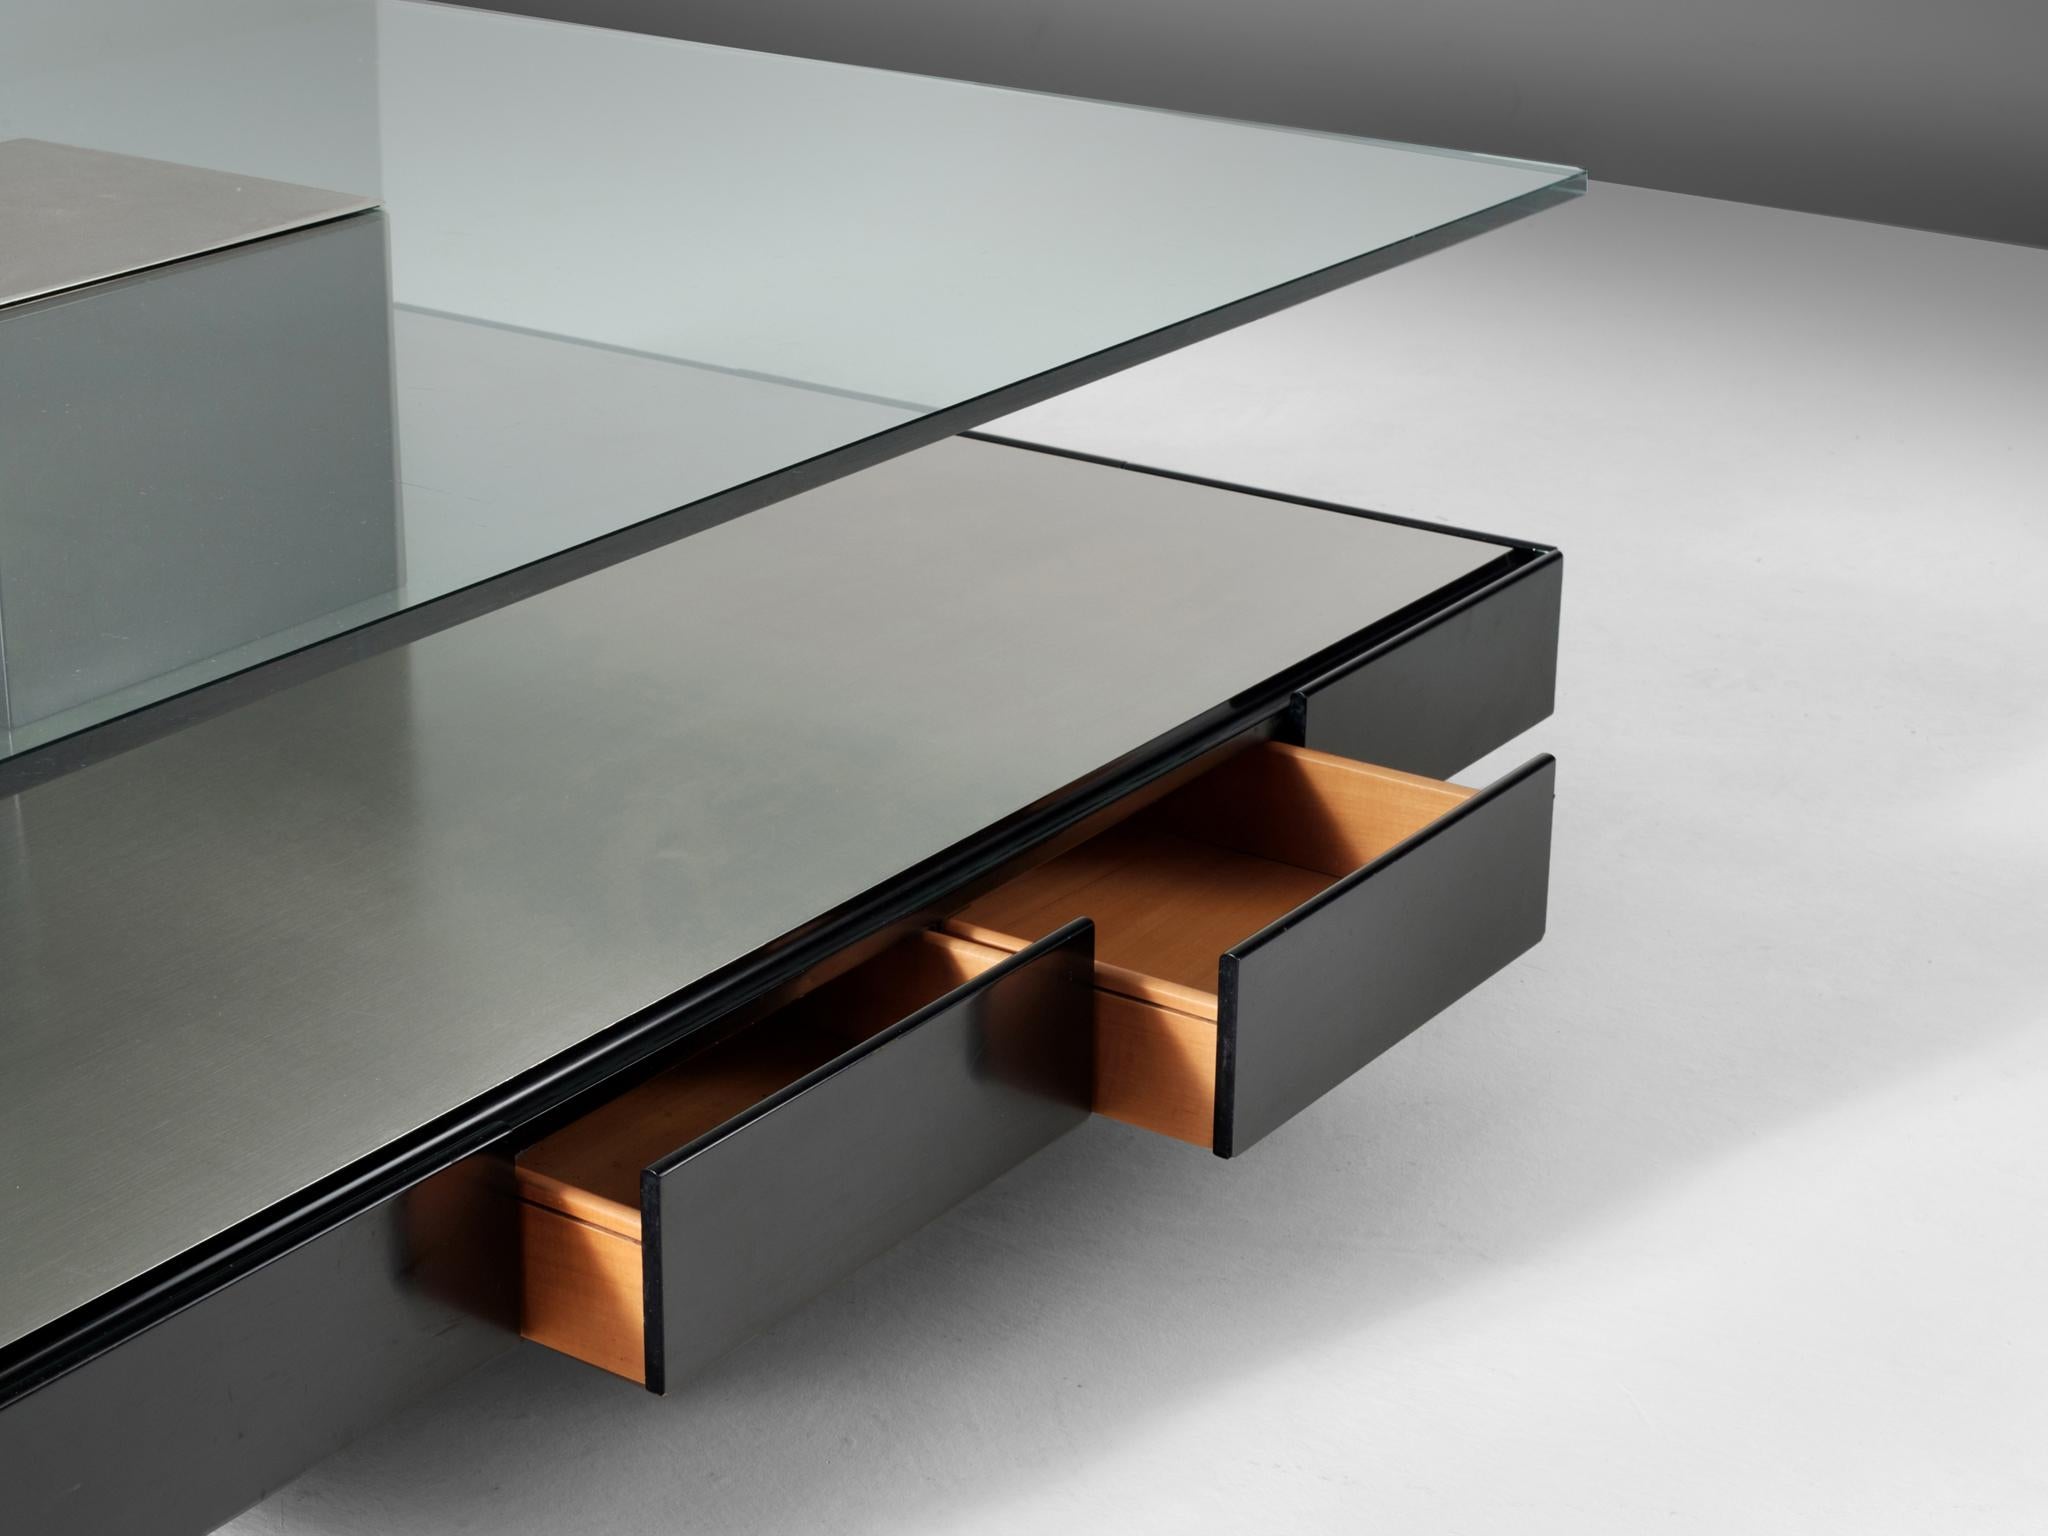 Marco Fantoni for Tecno, coffee table model T147, metal, wood and glass Italy, 1969

Minimalistic cocktail table by Italian designer Marco Fantoni for Tecno. This large table with clean and modern design consist of a raised base in wood, with satin